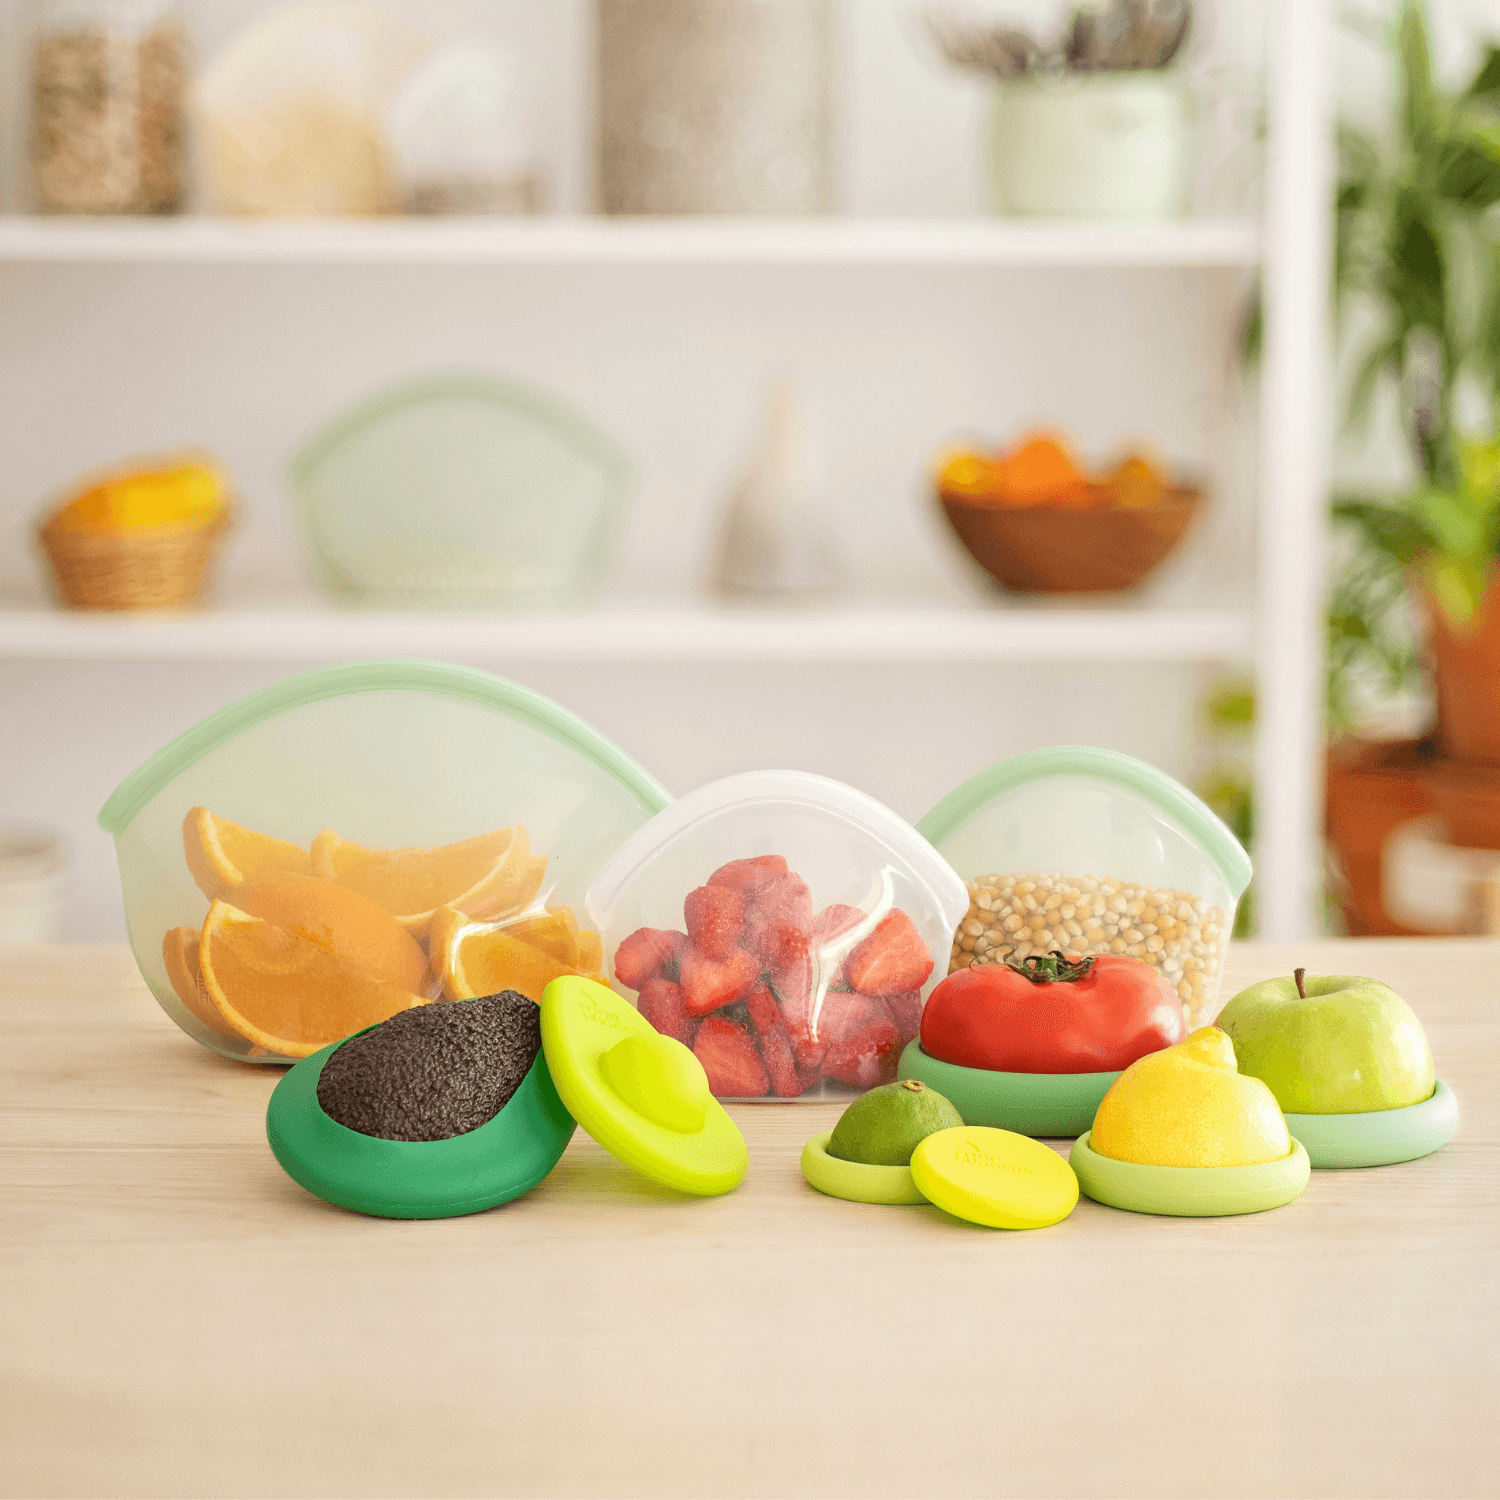 Set of ten silicone Food Huggers protecting fruits and vegetables on a wooden table, sustainable alternative to plastic wrap